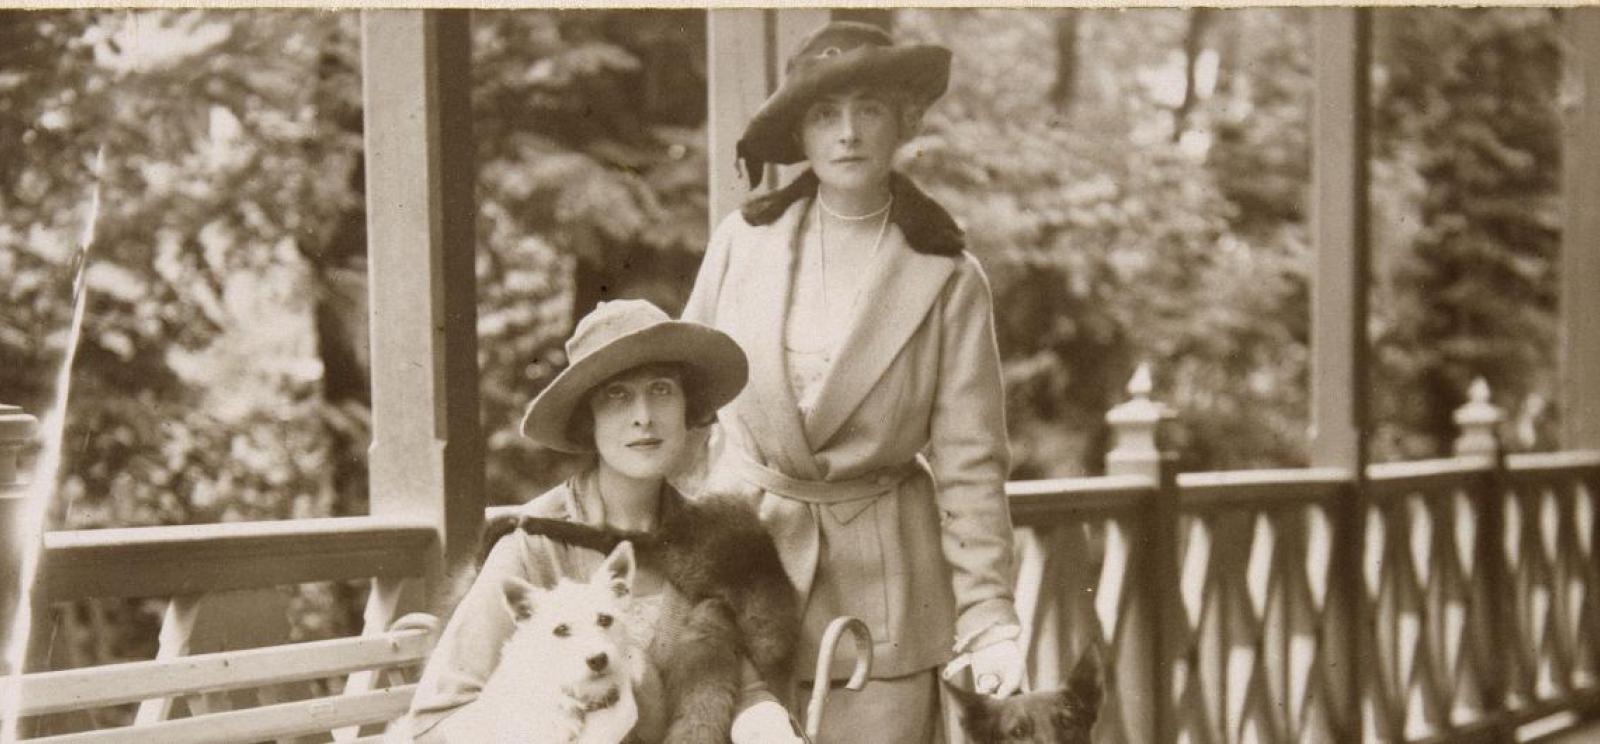 Sepia photograph of two women dressed in walking suits and hats on a building's porch. One is seated with a small dog in her lap.